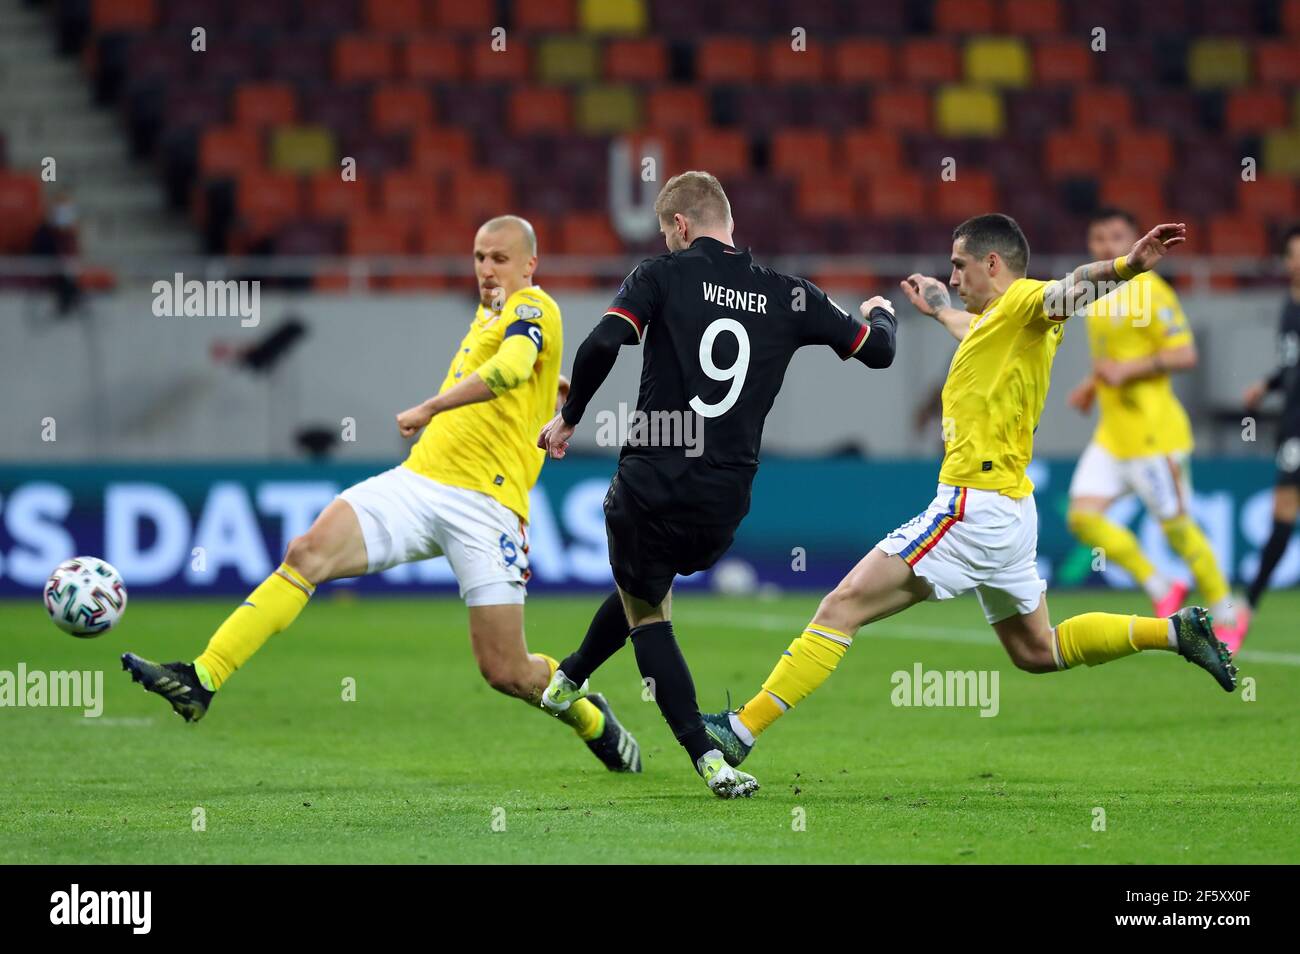 Bukarest, Romania. 28th Mar, 2021. Football: World Cup Qualification Europe, Romania - Germany, Group Stage, Group J, Matchday 2 at Arena Nationala. Germany's Timo Werner (M) and Romania's Vlad Chiriches battle for the ball. IMPORTANT NOTE: In accordance with the regulations of the DFL Deutsche Fußball Liga and the DFB Deutscher Fußball-Bund, it is prohibited to use or have used photographs taken in the stadium and/or of the match in the form of sequence pictures and/or video-like photo series. Credit: Stefan Constantin/dpa/Alamy Live News Stock Photo